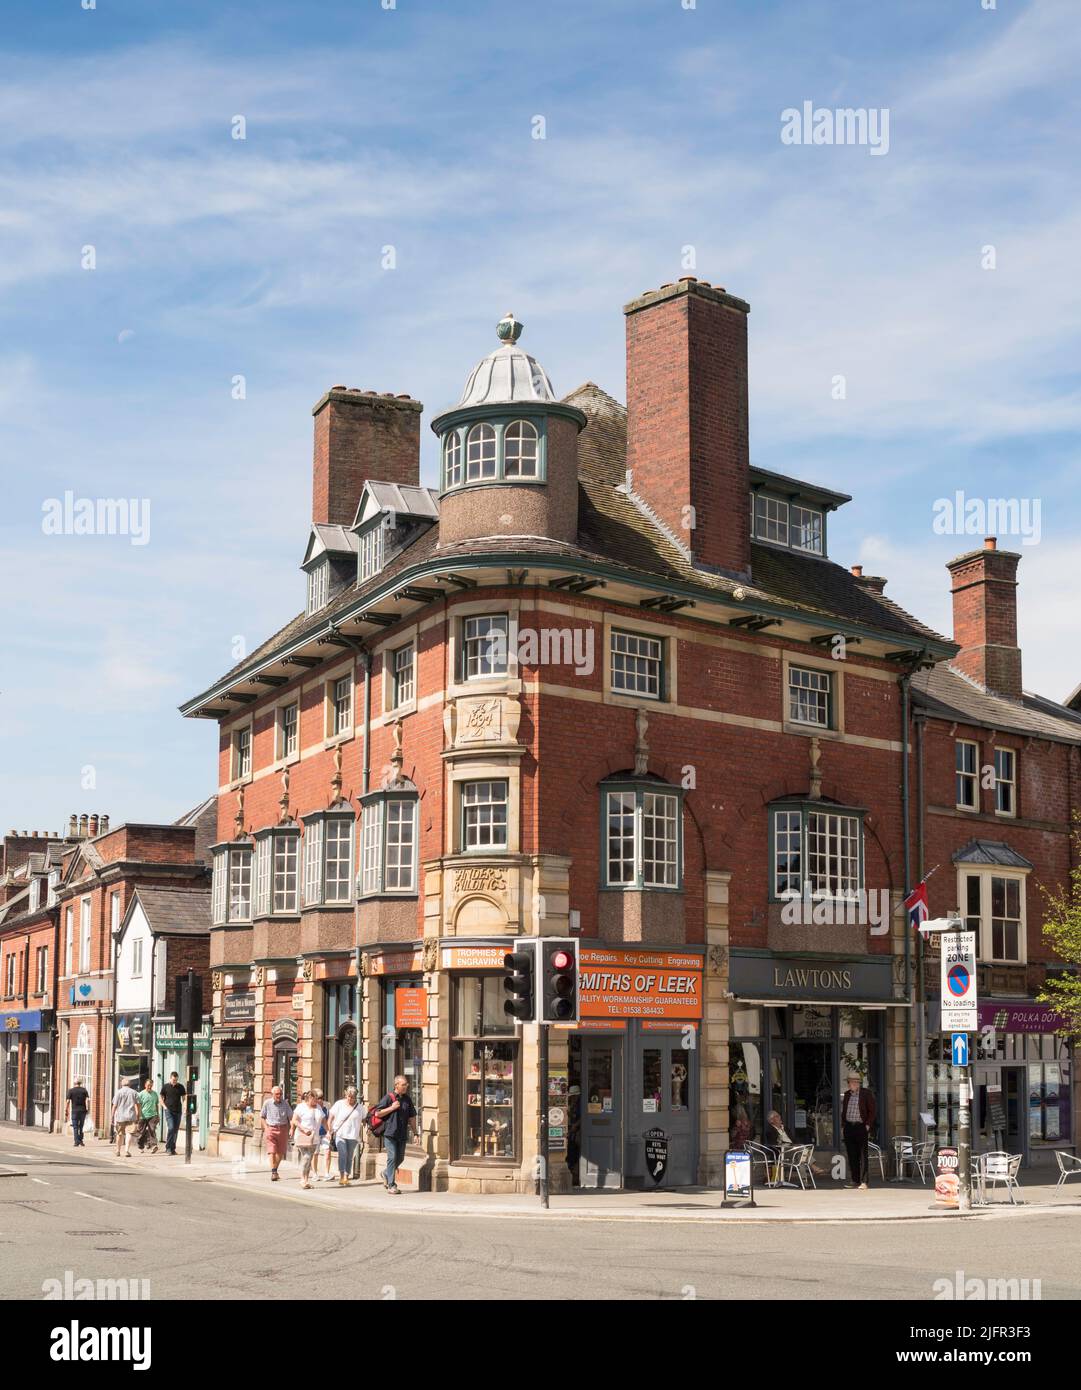 The 19th century arts and crafts style Sanders Buildings in Leek town centre, Staffordshire, England, UK Stock Photo